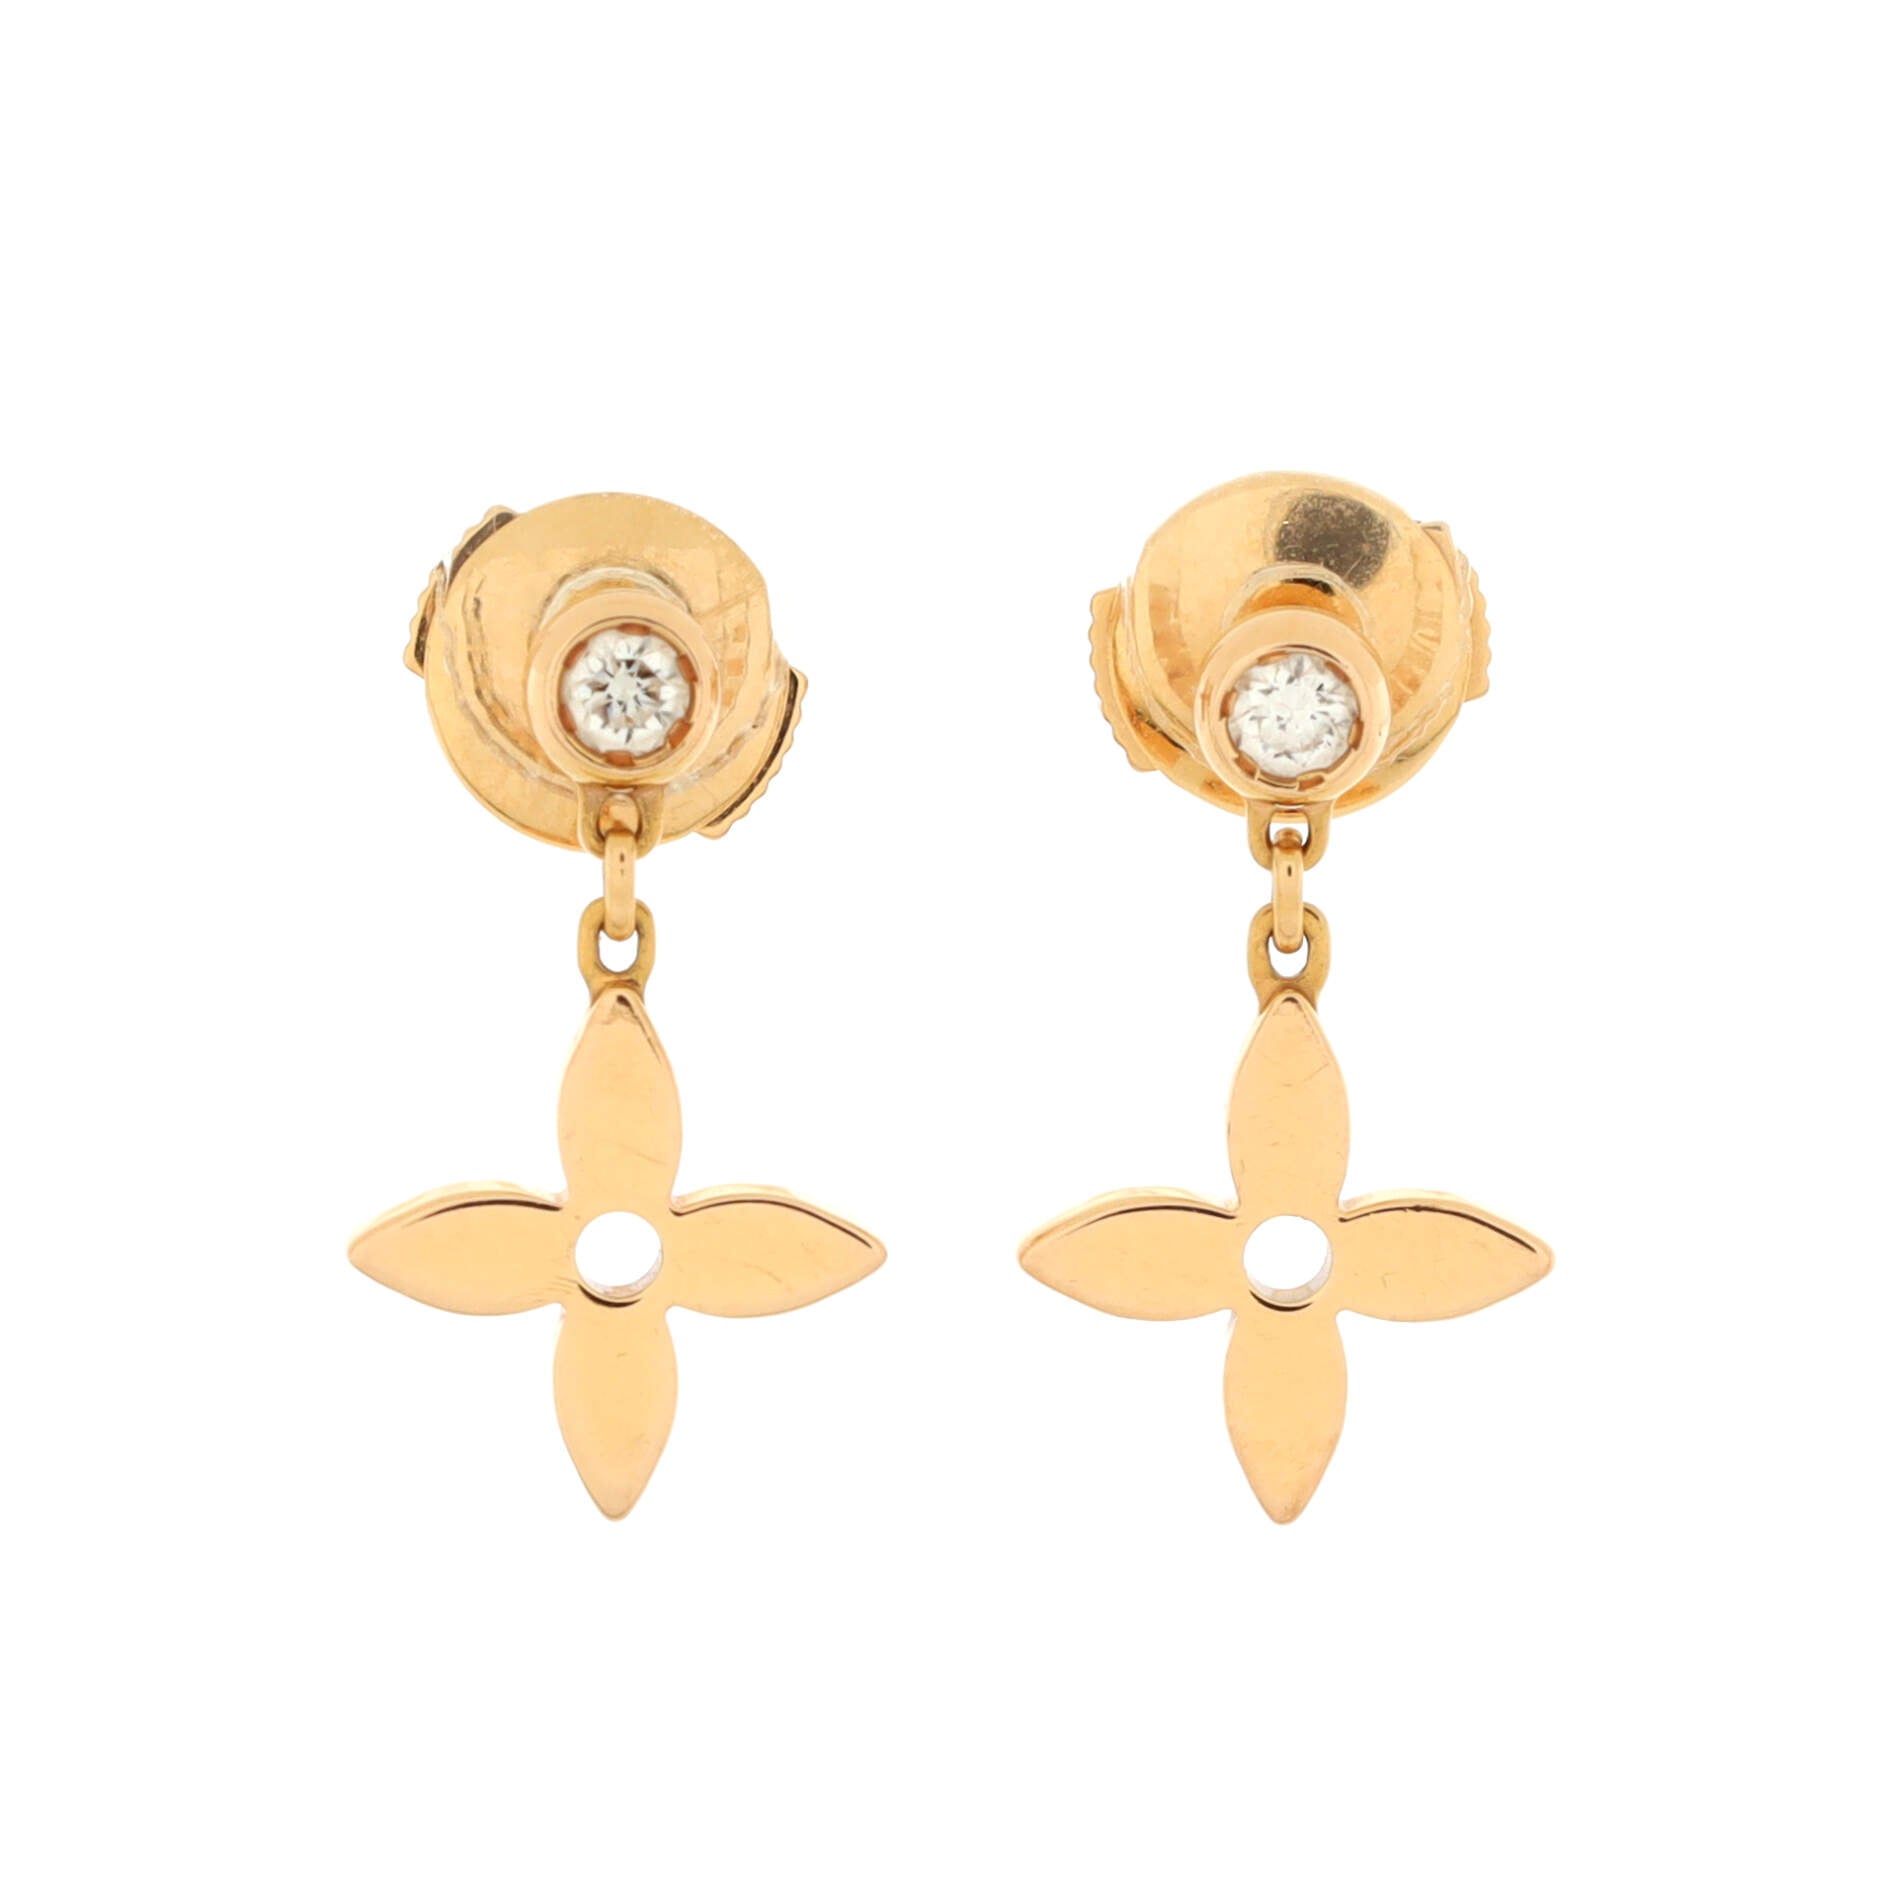 Shop Louis Vuitton Blooming earrings (M64859) by pipi77